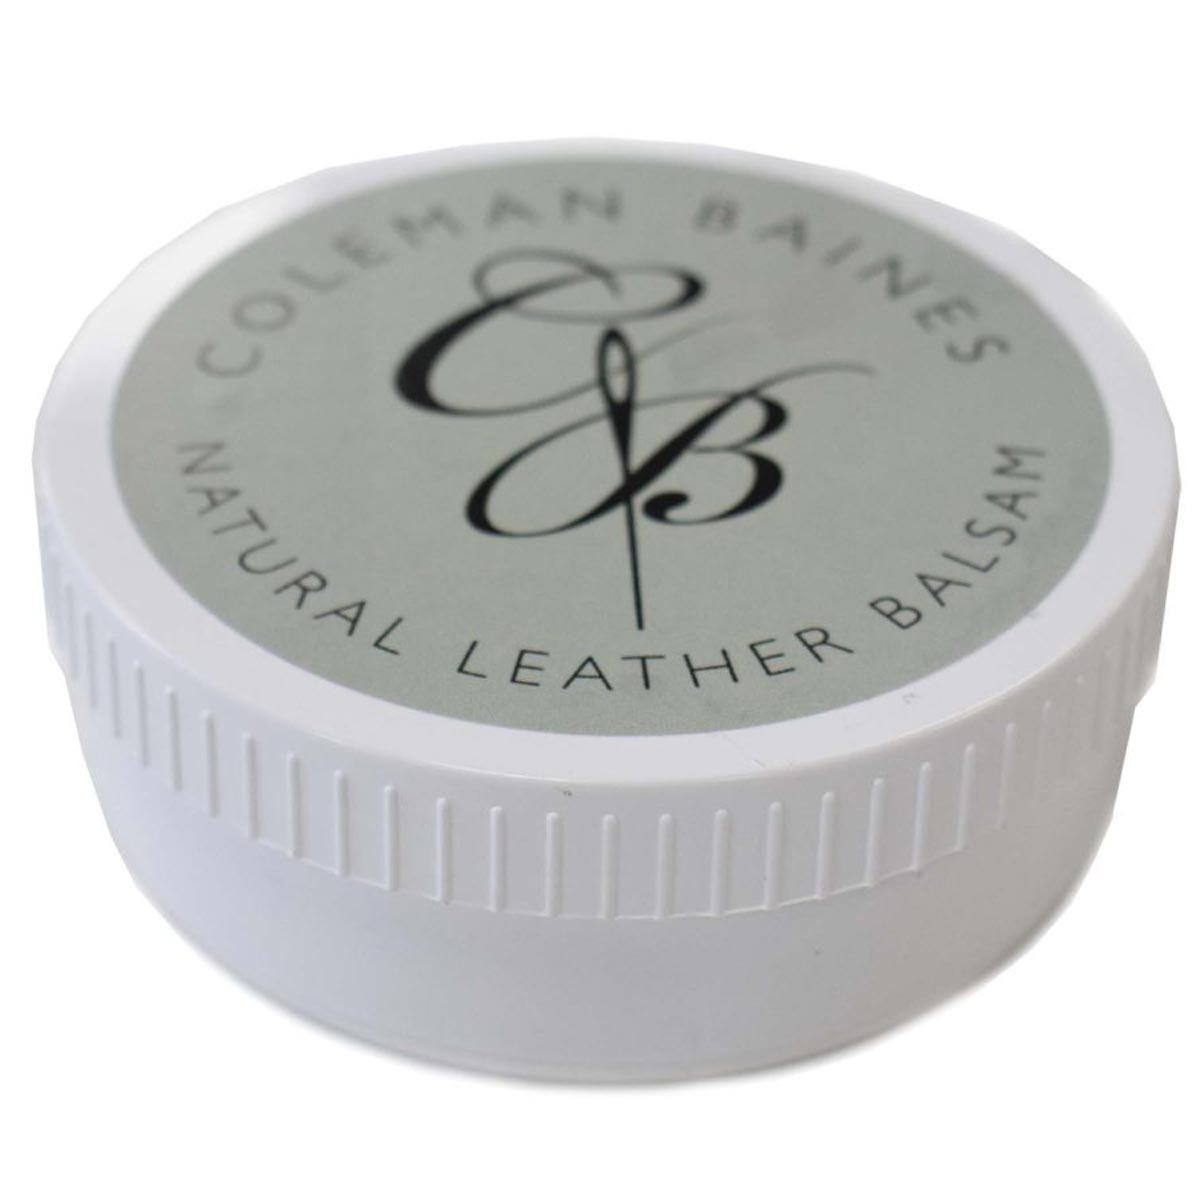 COLEMAN BAINES Leather Balsam - 150g